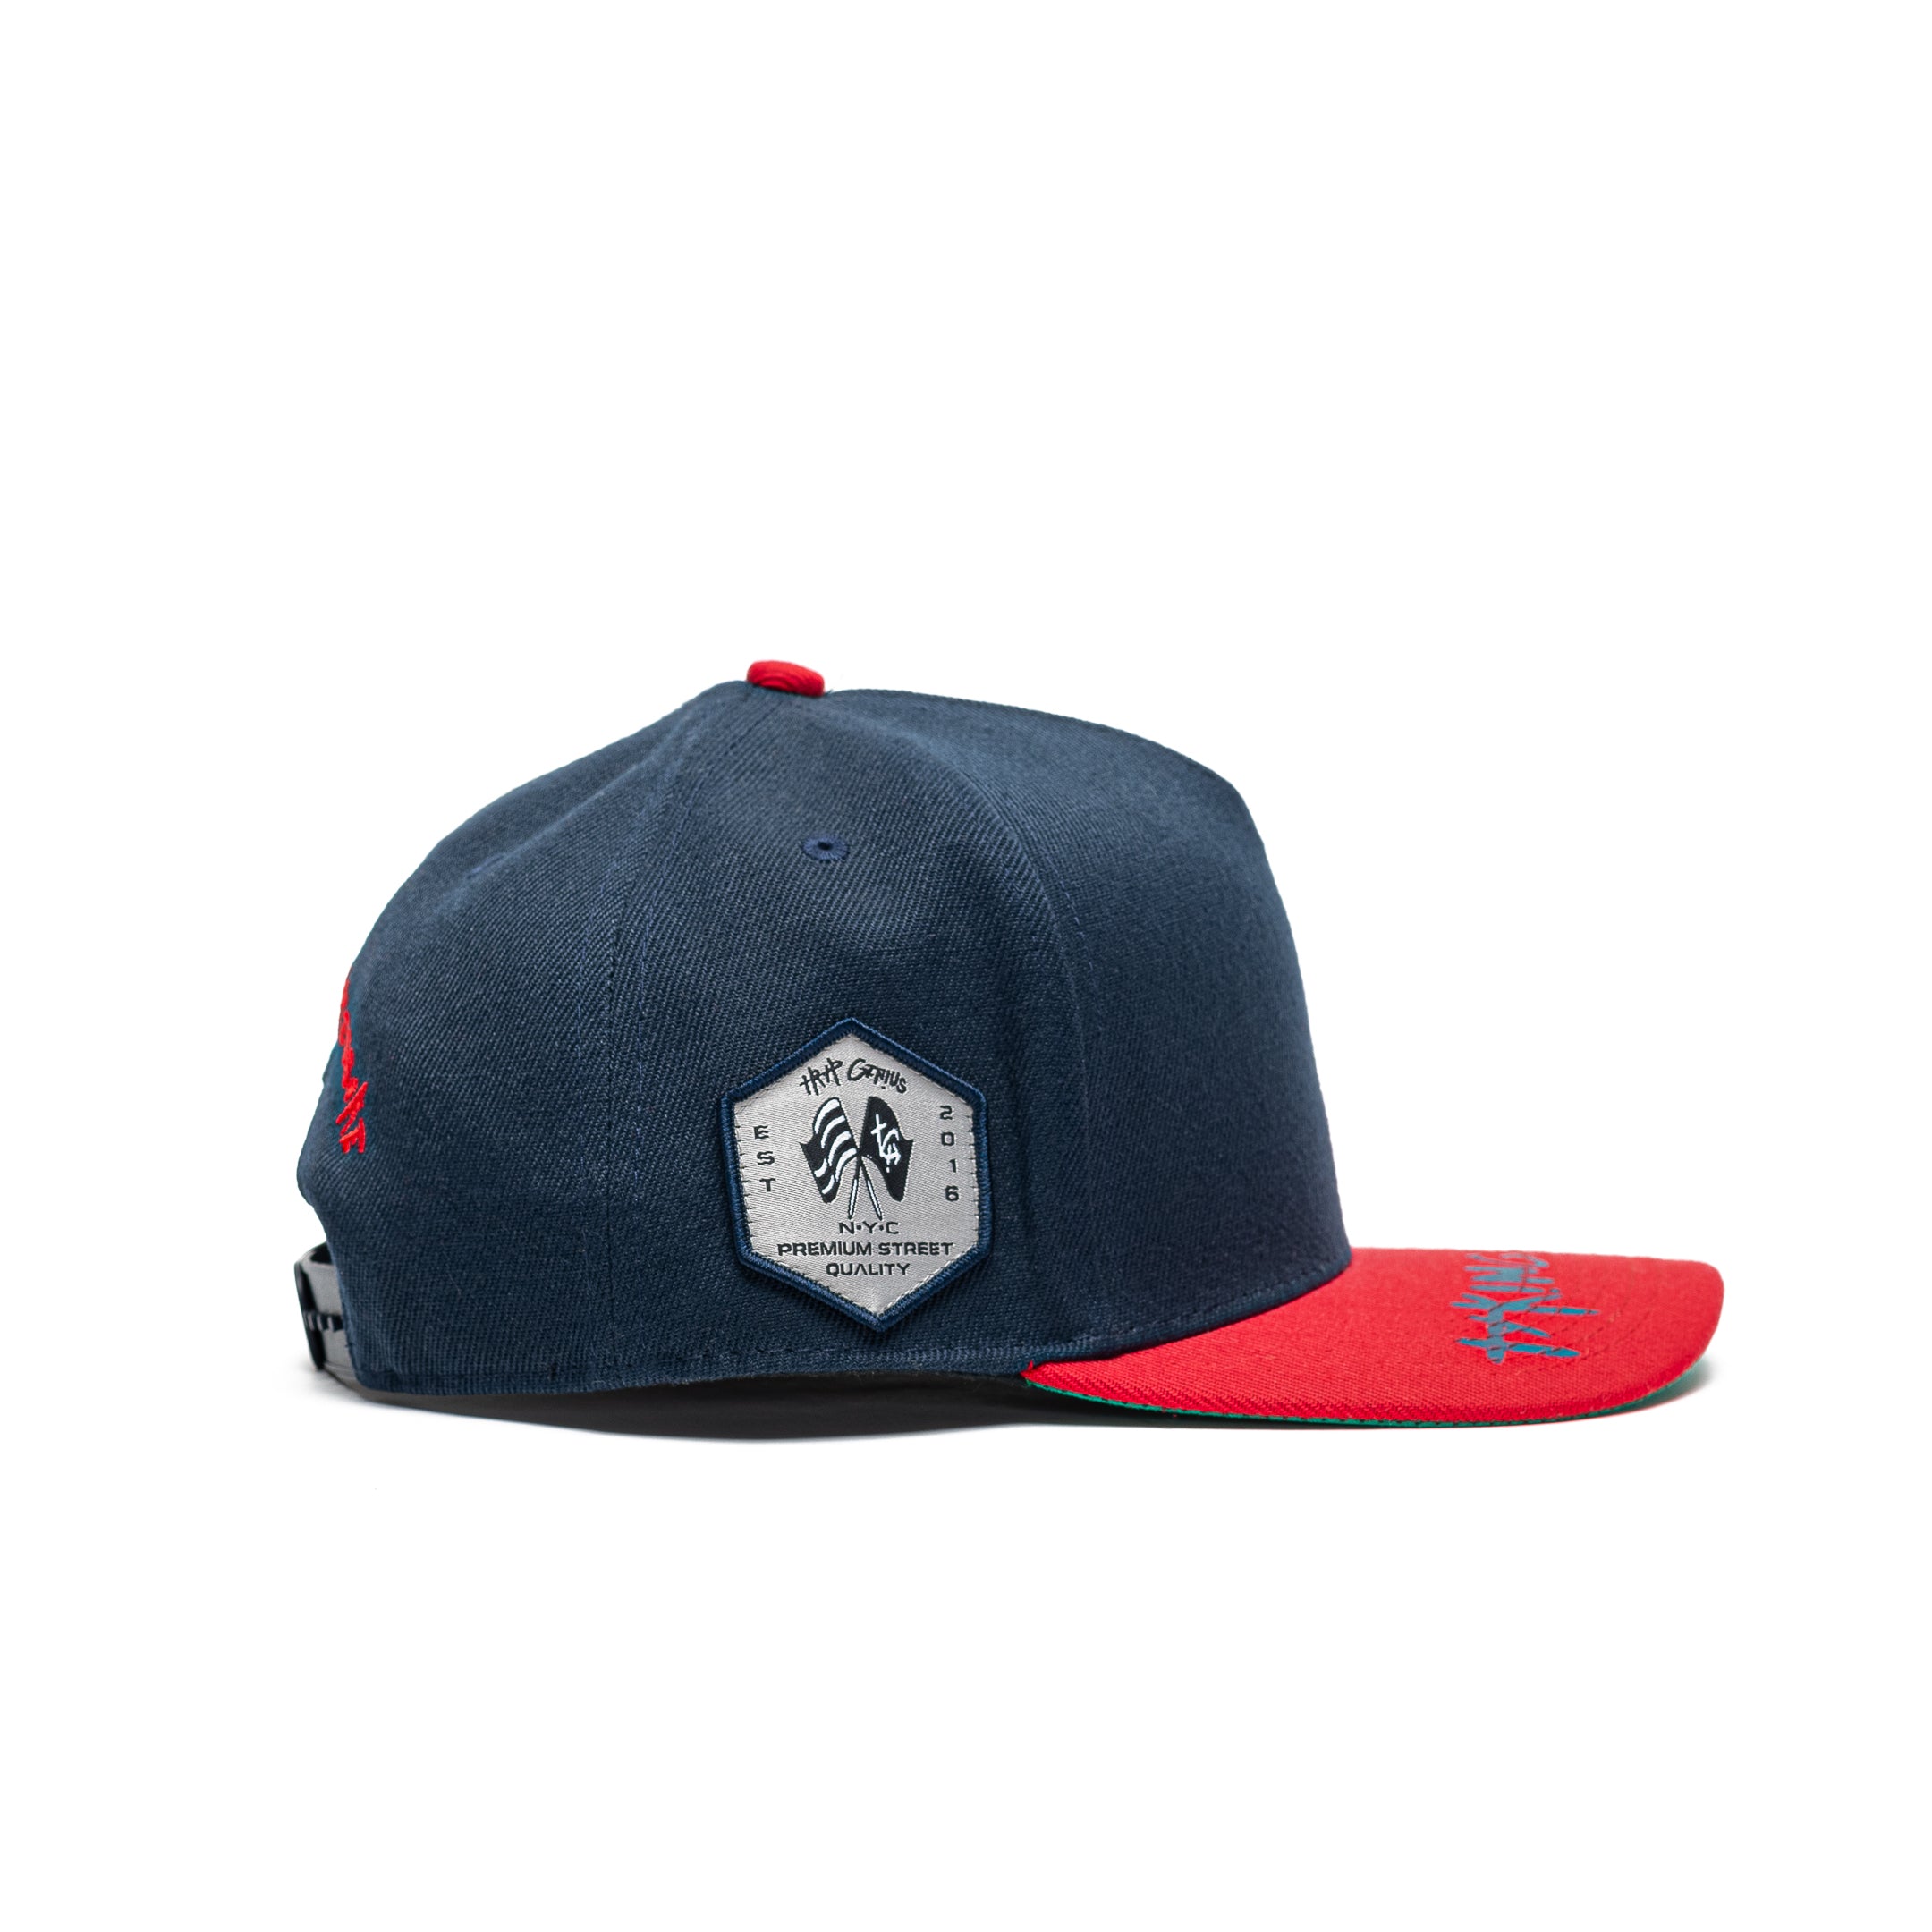 Trap Genius NYC Taking Risks Navy/Red SnapBack Hat